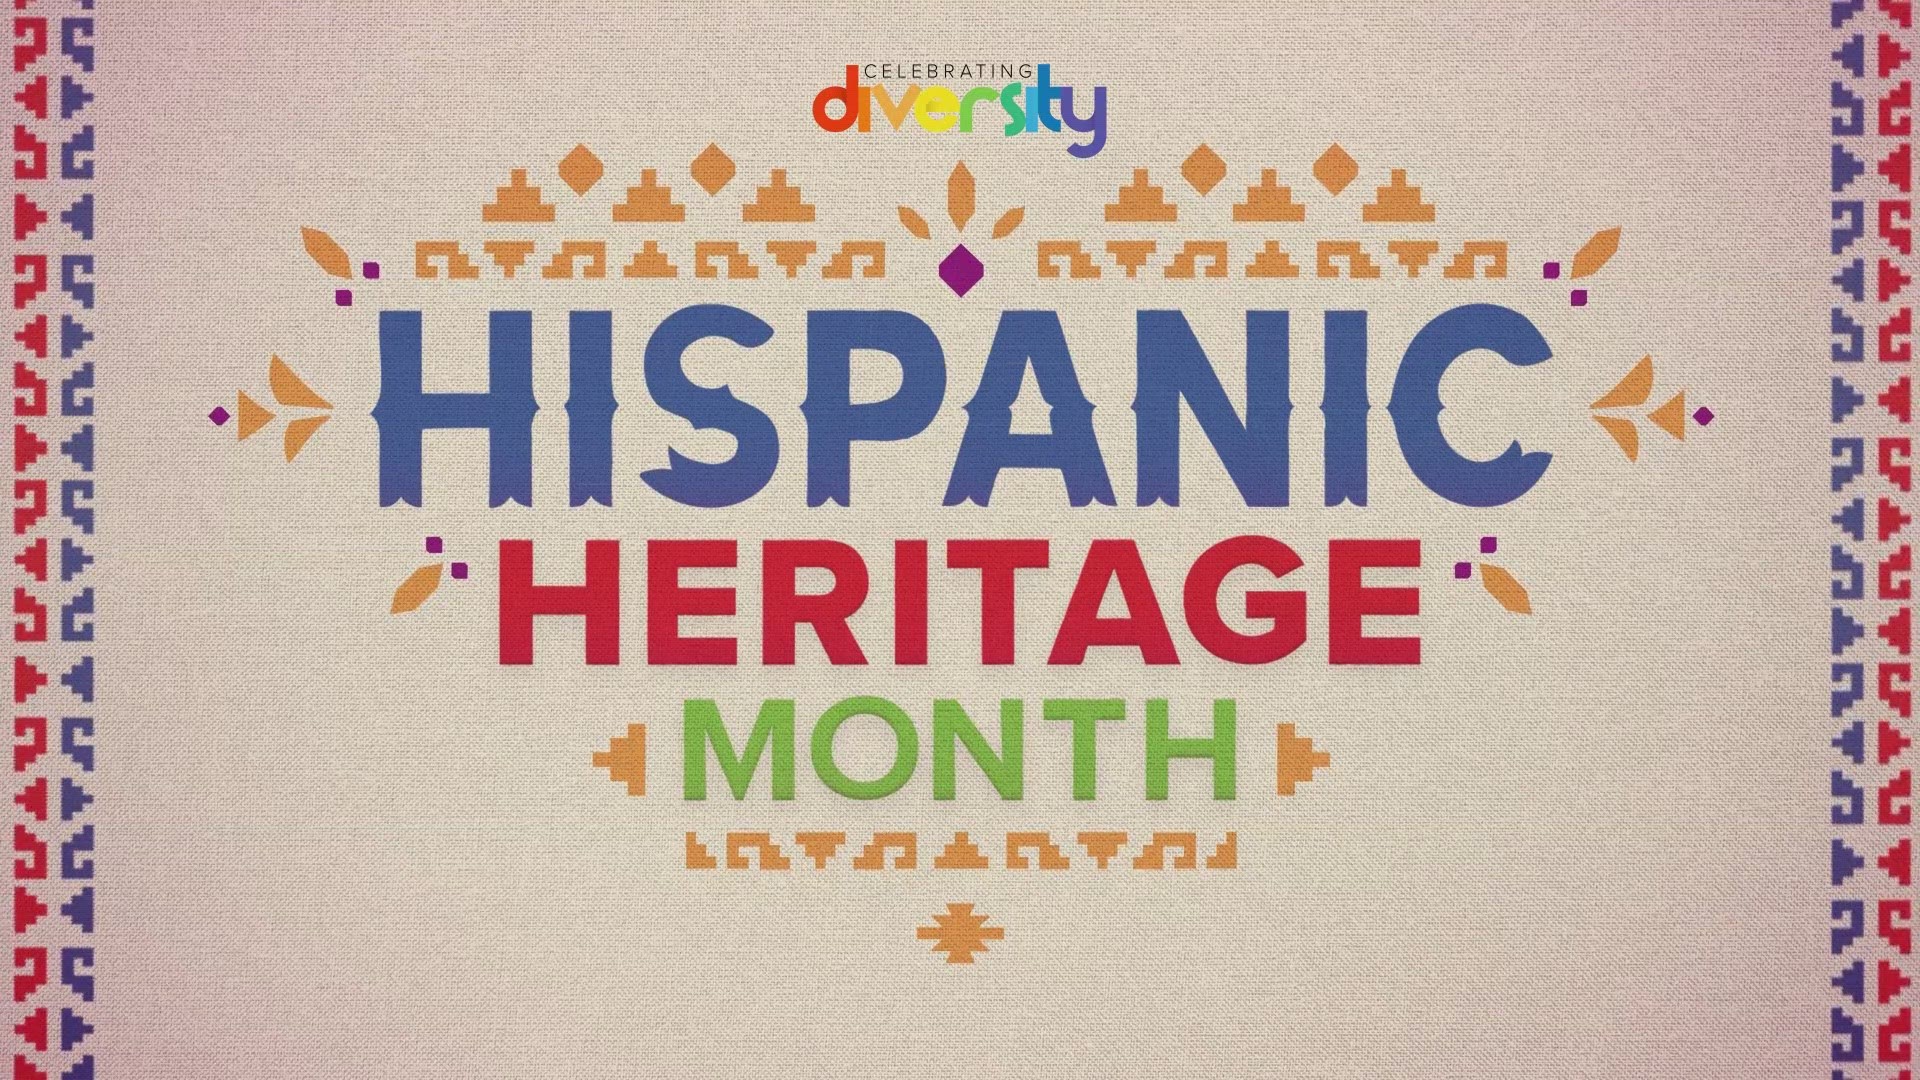 13News profiles Hispanic Hoosiers making a difference in their communities. Hispanic Heritage month runs from Sept 15th to Oct 15th